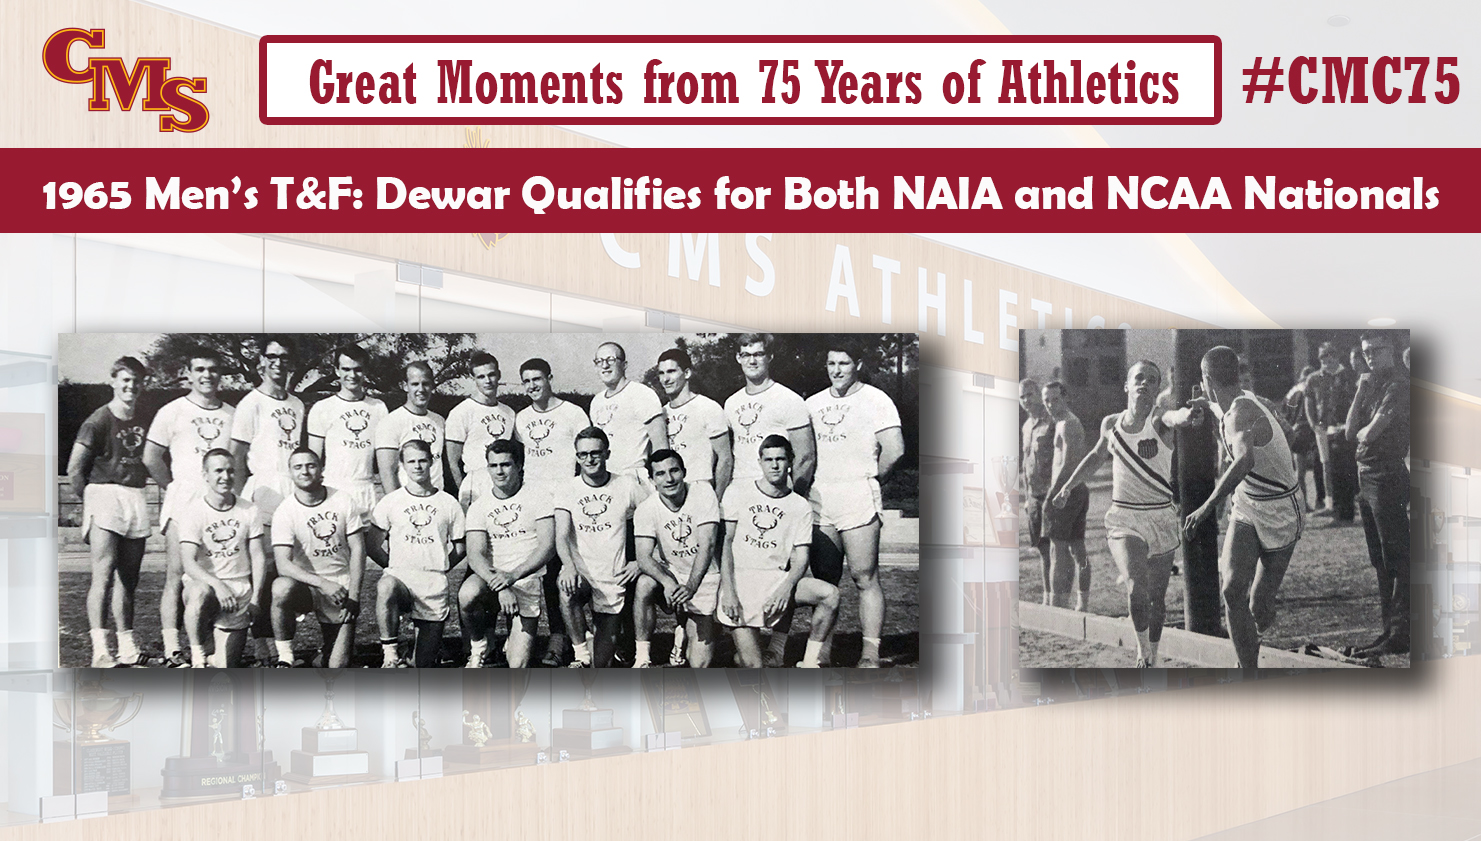 A 1965 men's track and field team photo and a shot of Jim Dewar competing. Words over the photo read: Great Moments from 75 Years of Athletics. 1965 Men's Track and Field: Dewar Qualifies for Both NAIA and NCAA Nationals.